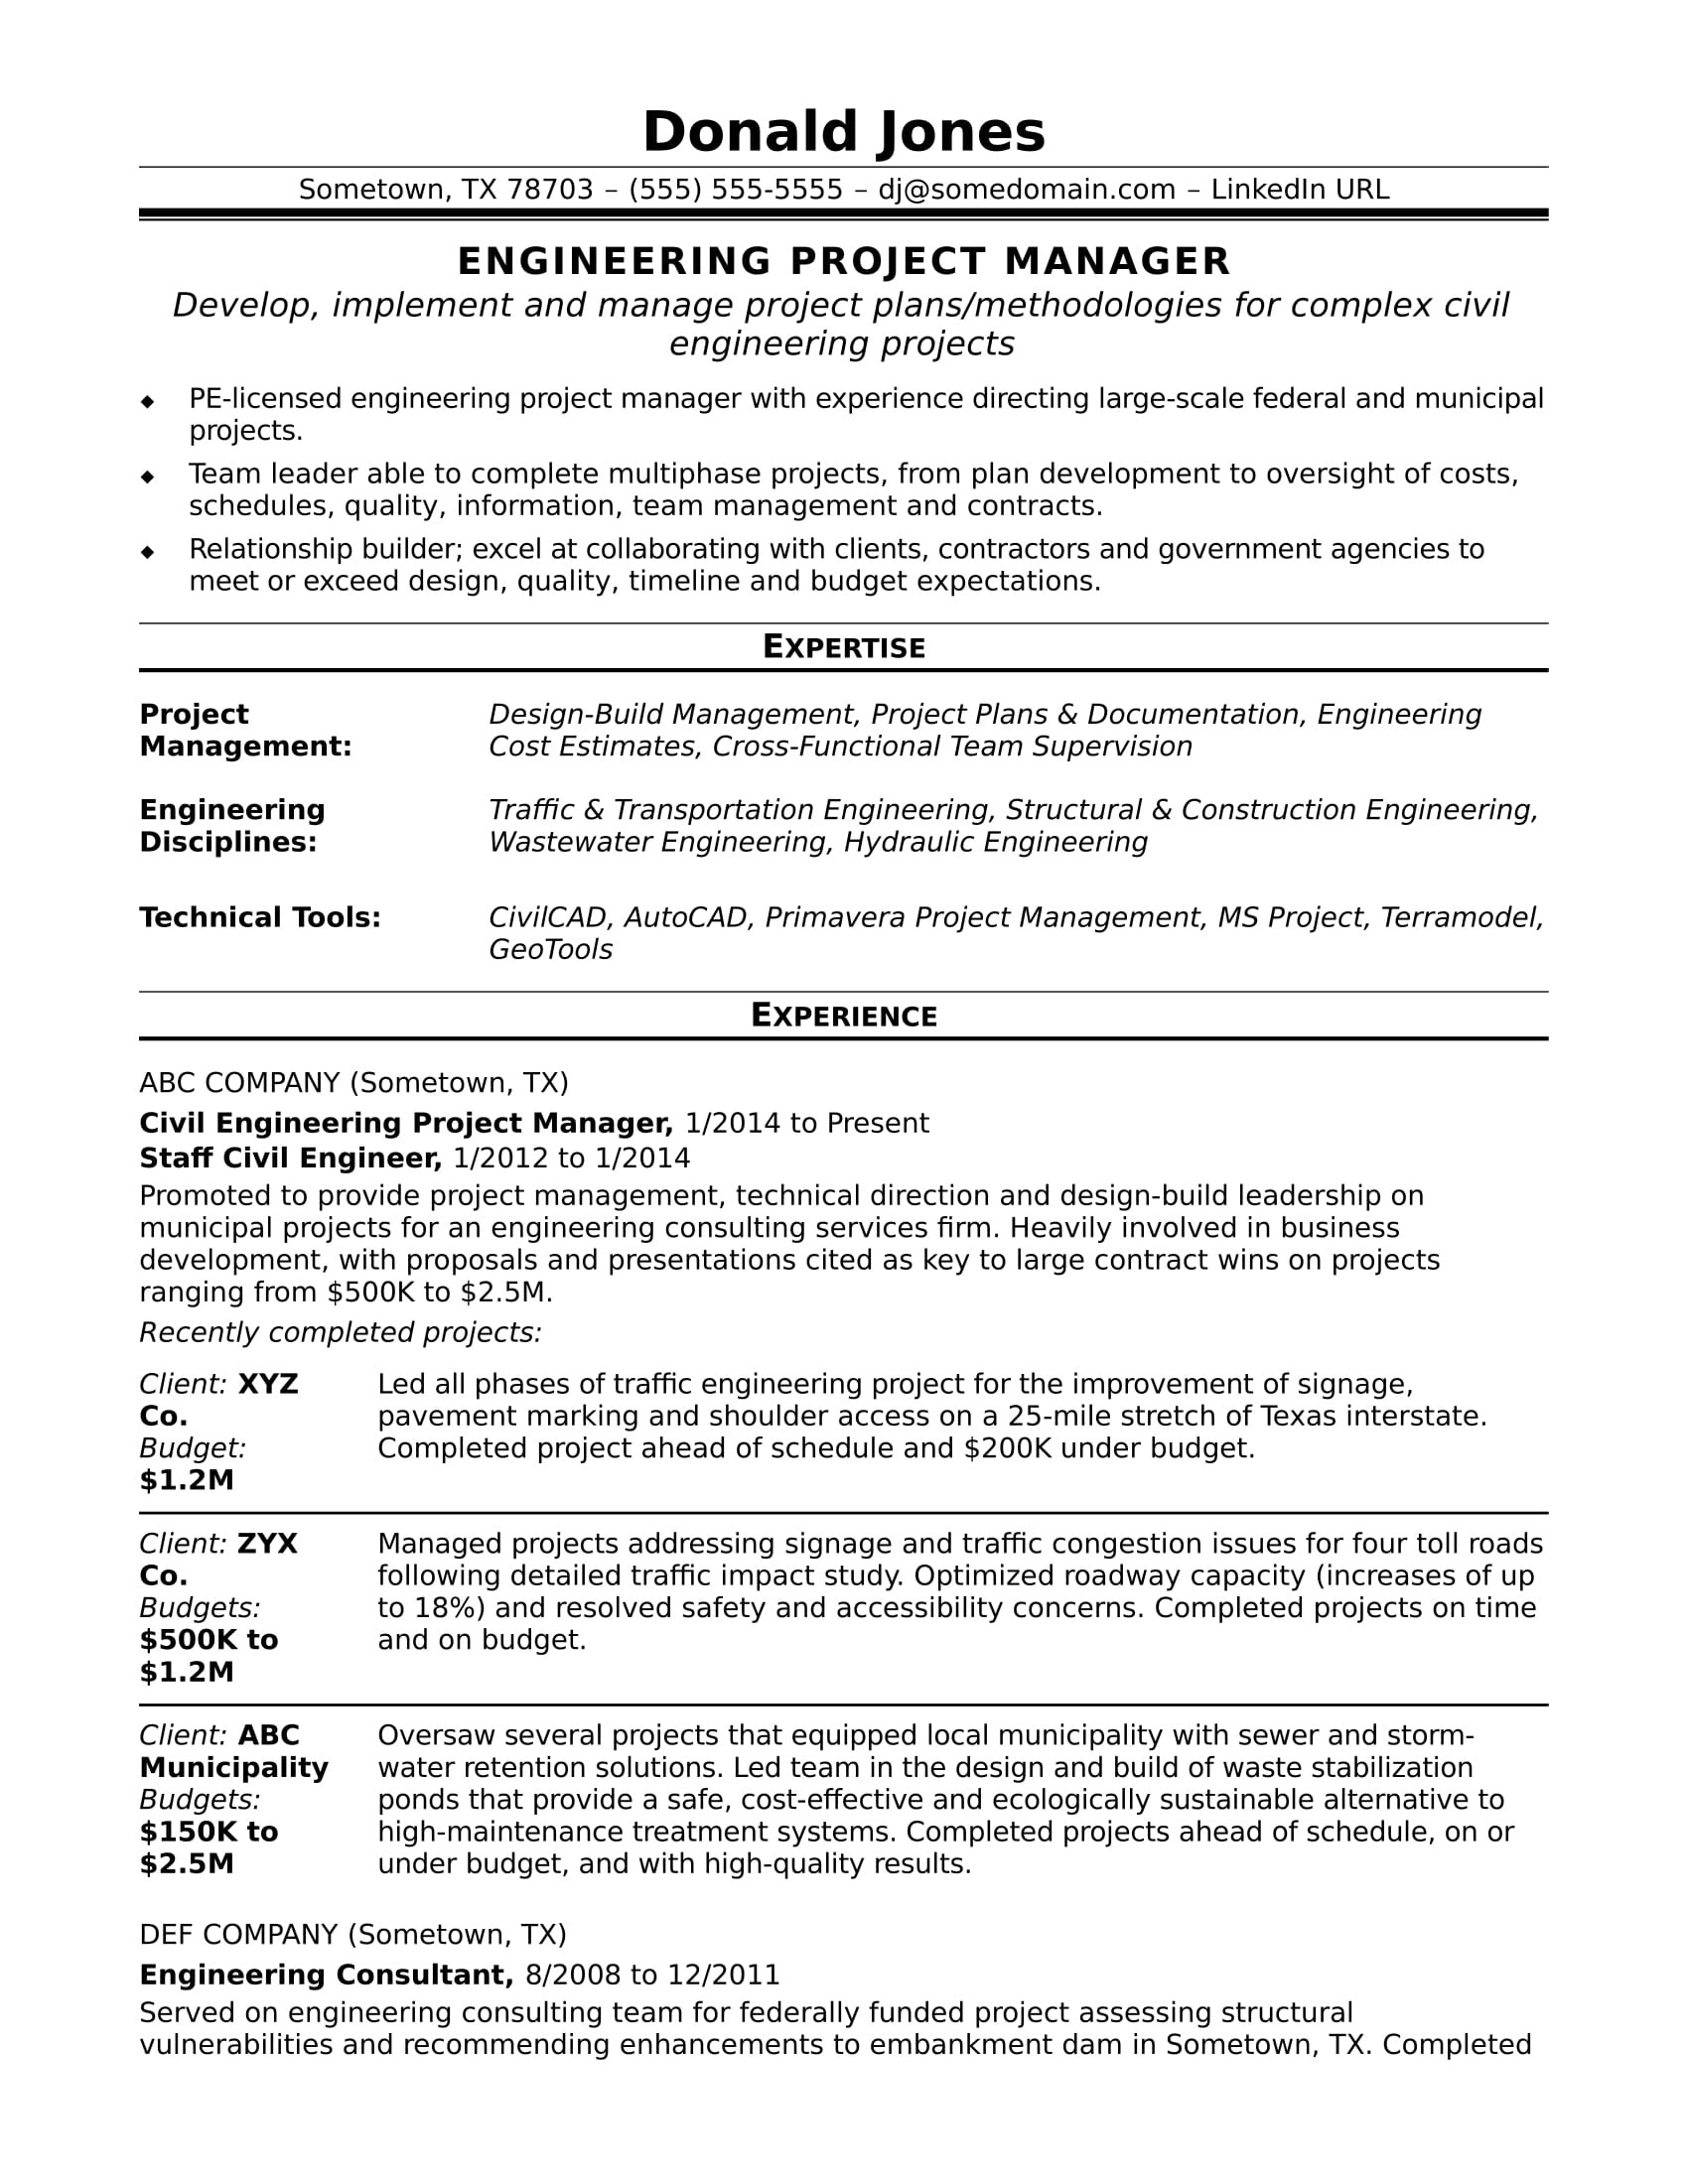 Resume Sample for A Project Manager In Engineering Sample Resume for A Midlevel Engineering Project Manager Monster.com